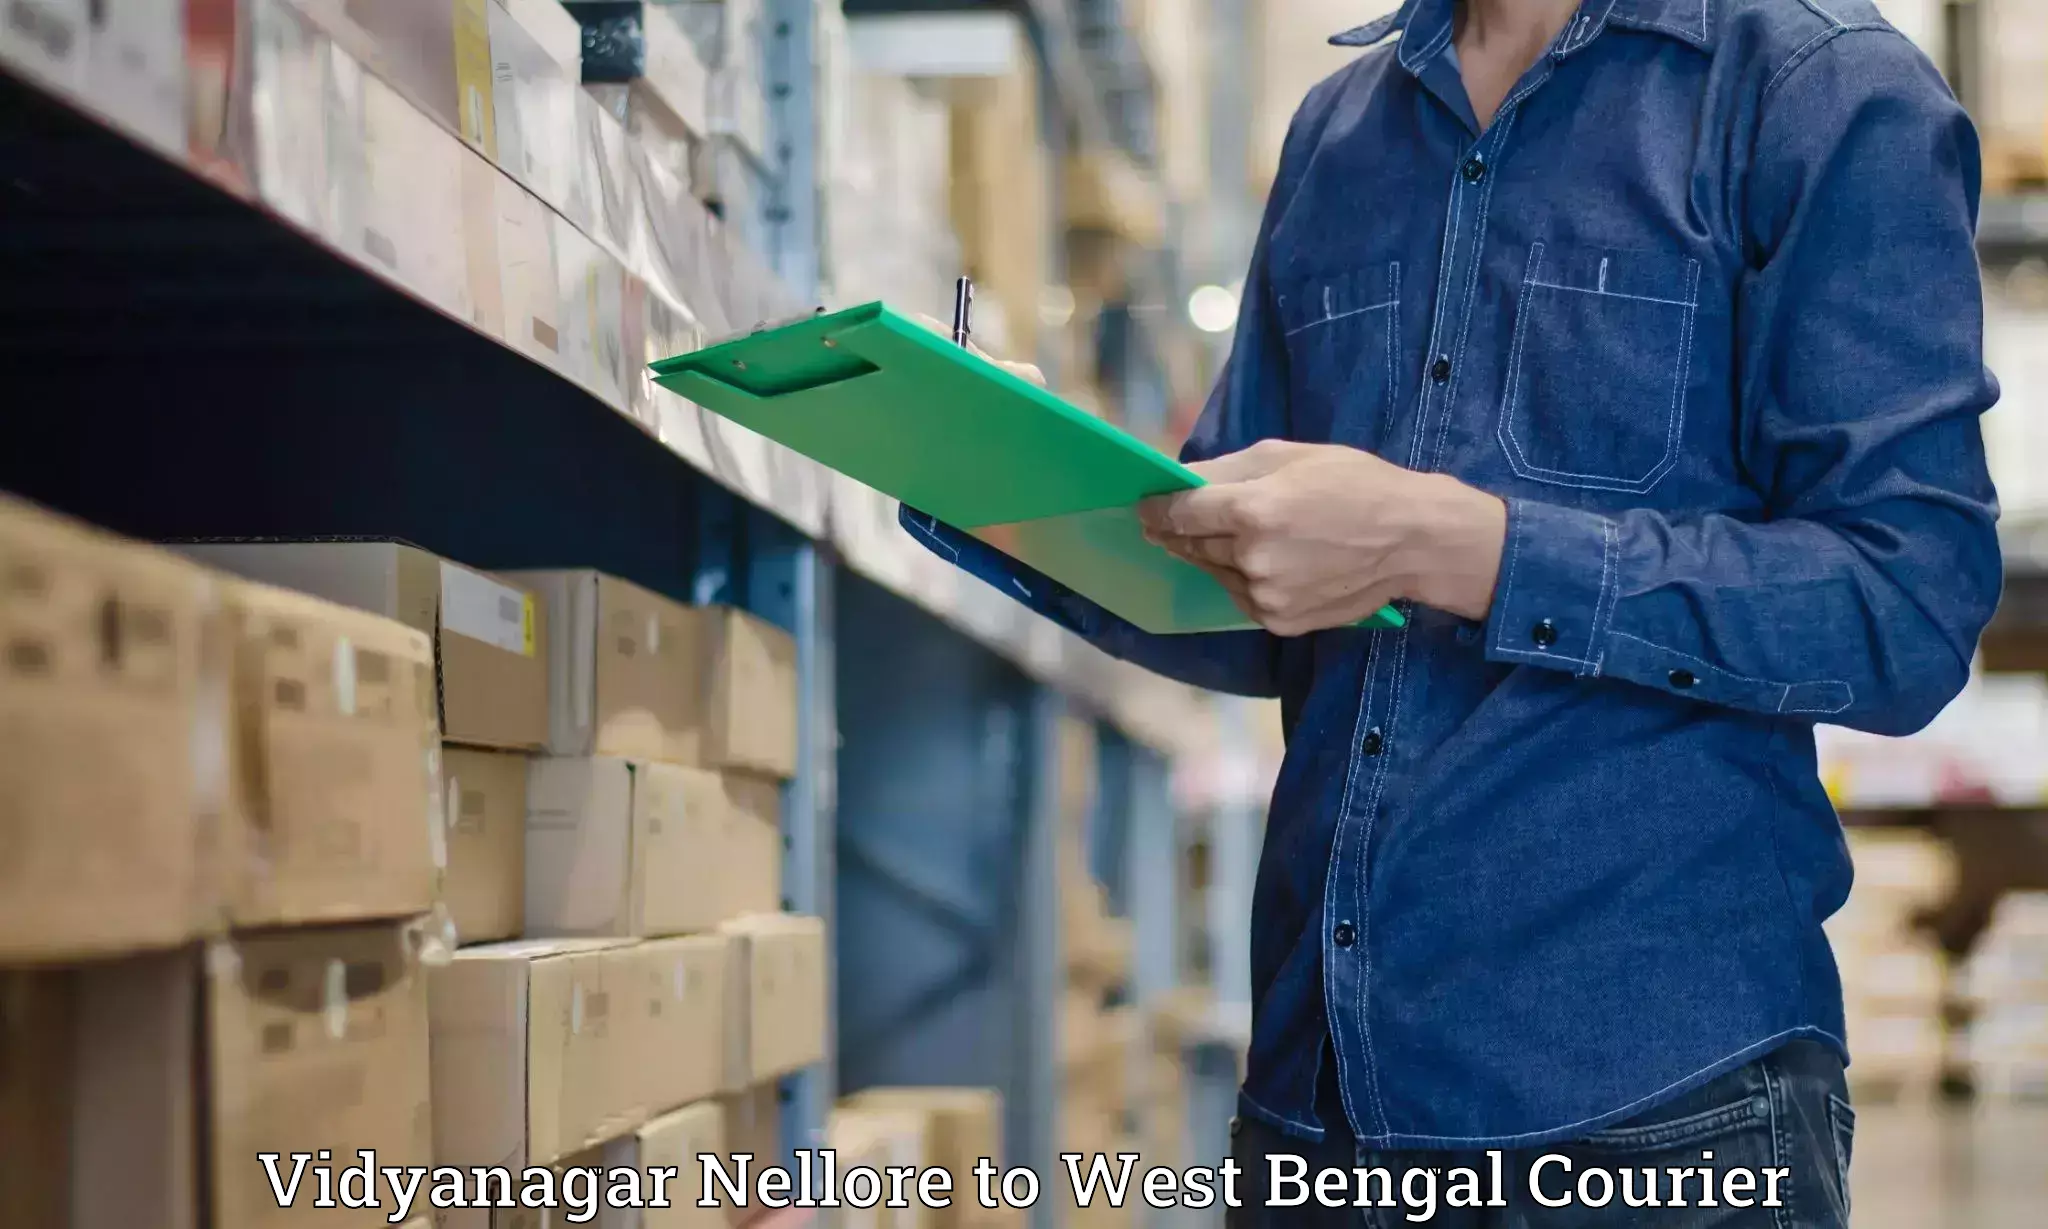 Luggage shipment strategy Vidyanagar Nellore to West Bengal